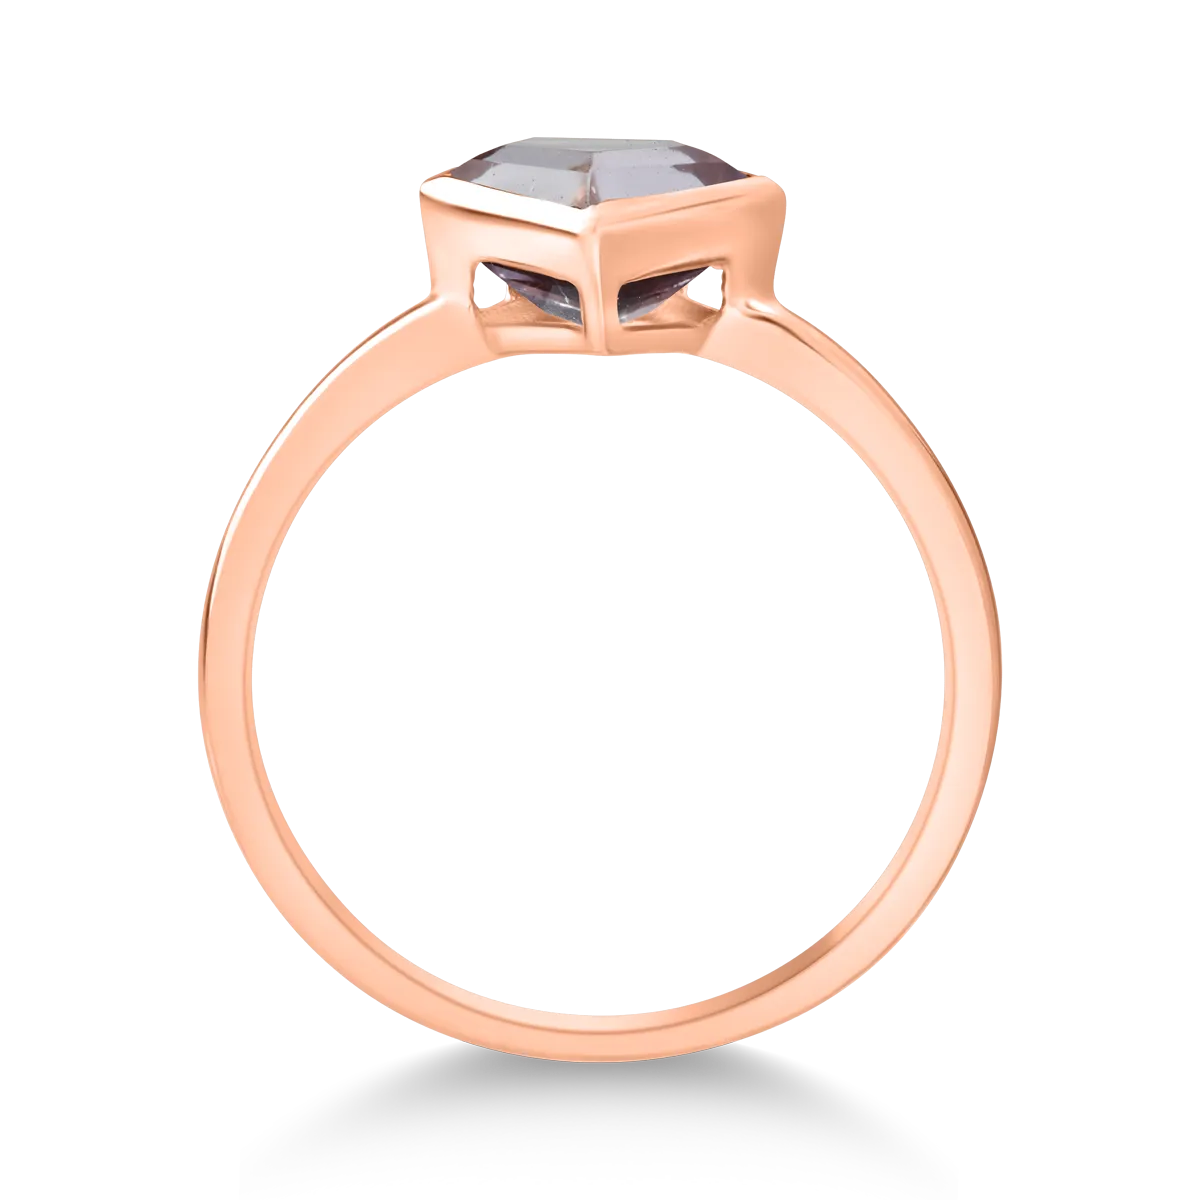 18K rose gold ring with 1.34ct pink amethyst